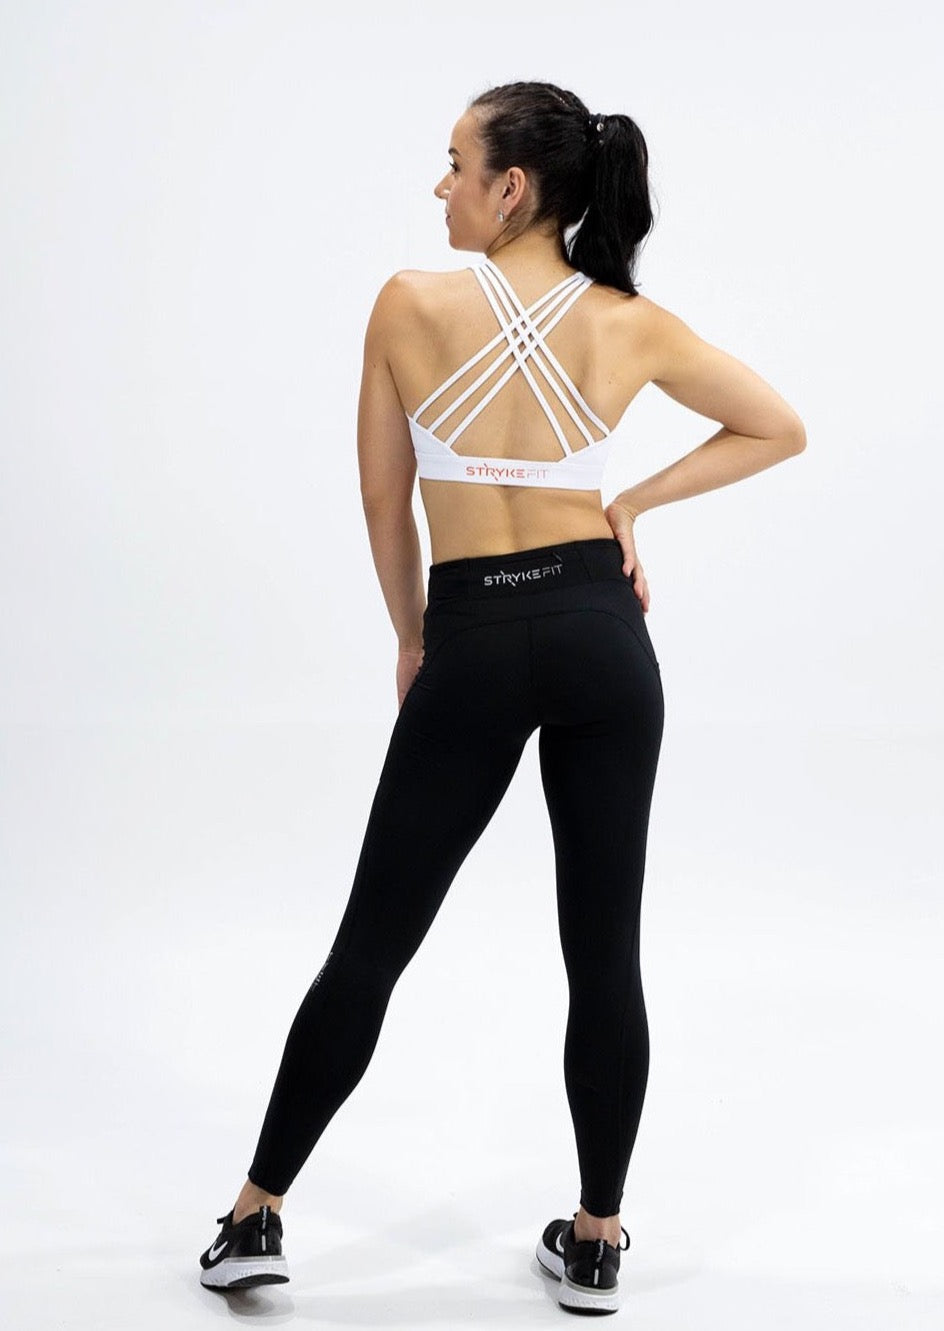 INSPIRE RUNNING CROP TOP has been designed with featured multi cross back straps. This crop top is for the girl who likes to look good while running or working out in a medium impact top. With a reflective back logo print you can be seen while running in low light.